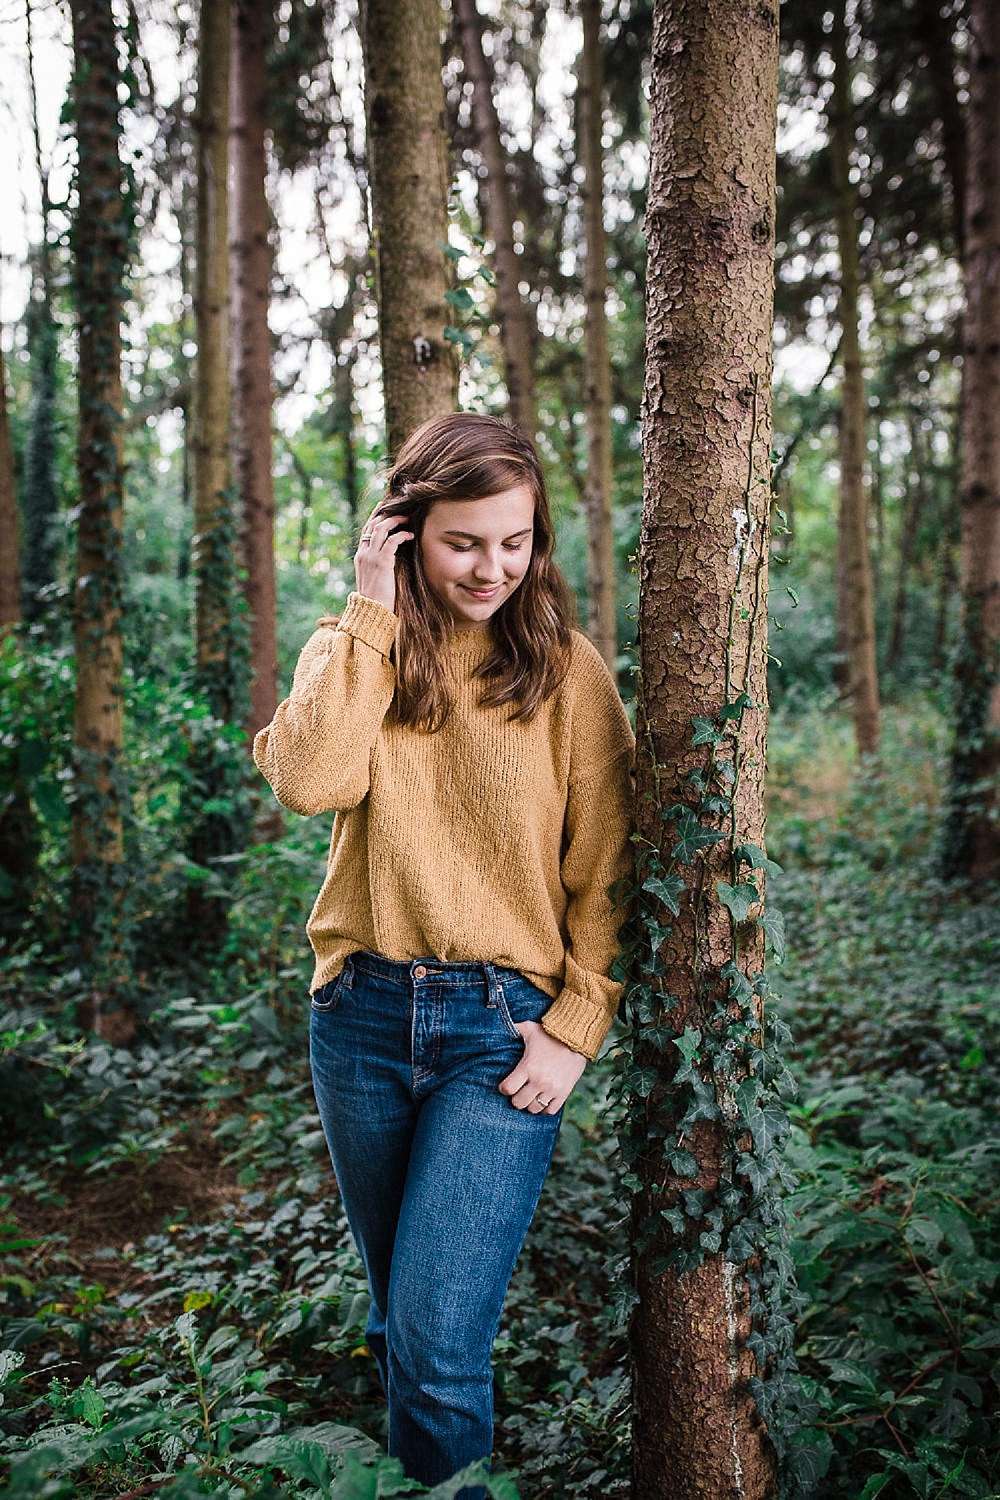  Lancaster senior session photo of a young girl in a yellow sweater and jeans standing in a pine forest. 